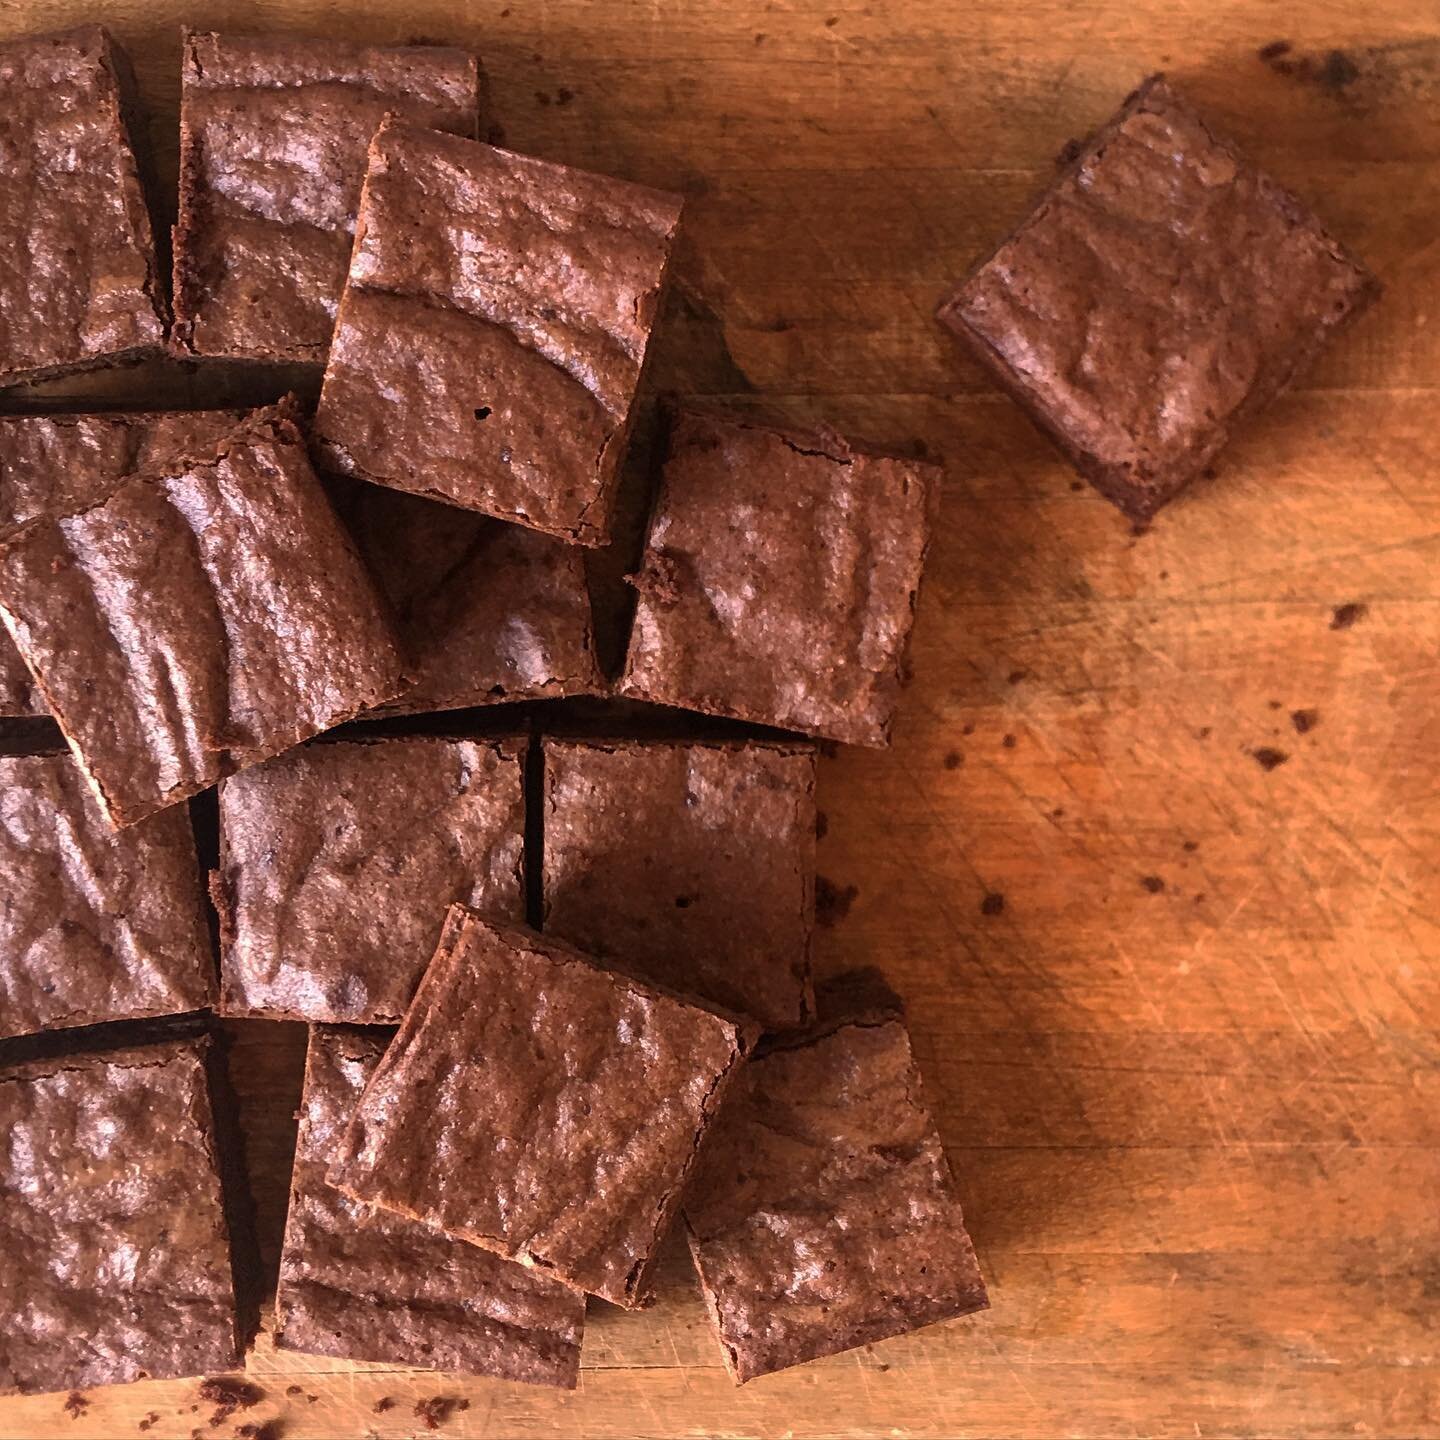 My #glutenfree #brownies are always a crowd pleaser. I like to keep several batches in the freezer ready to go at a moments notice throughout the summer. This recipe is is my #cookbook #glutenfreebakingathome. #glutenfreebaking #allergenfreebaking #p